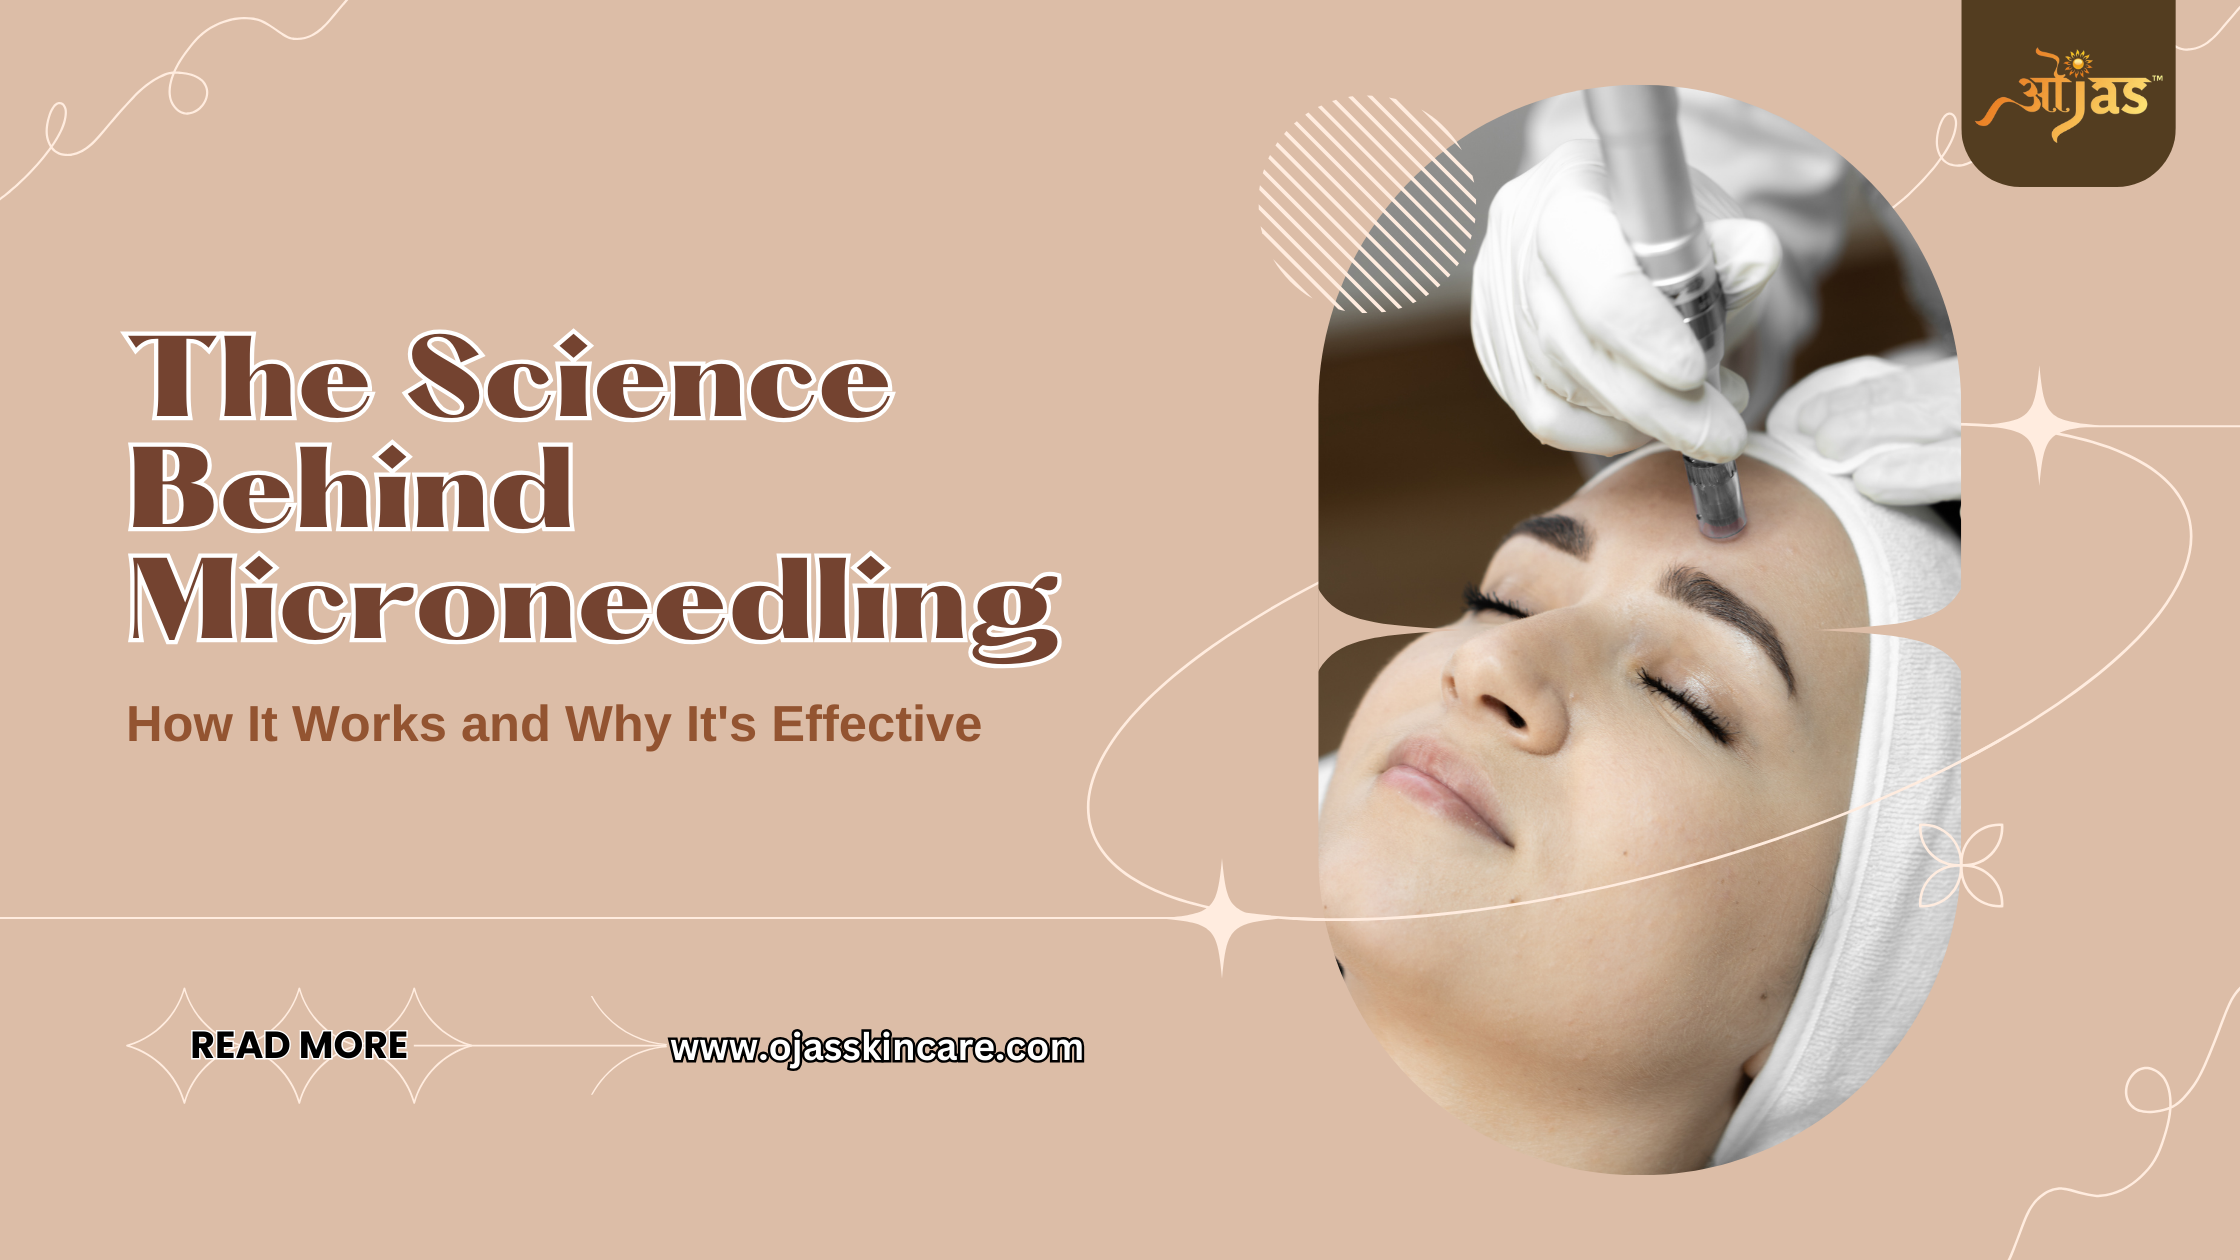 The Science Behind Microneedling: How It Works and Why It’s Effective